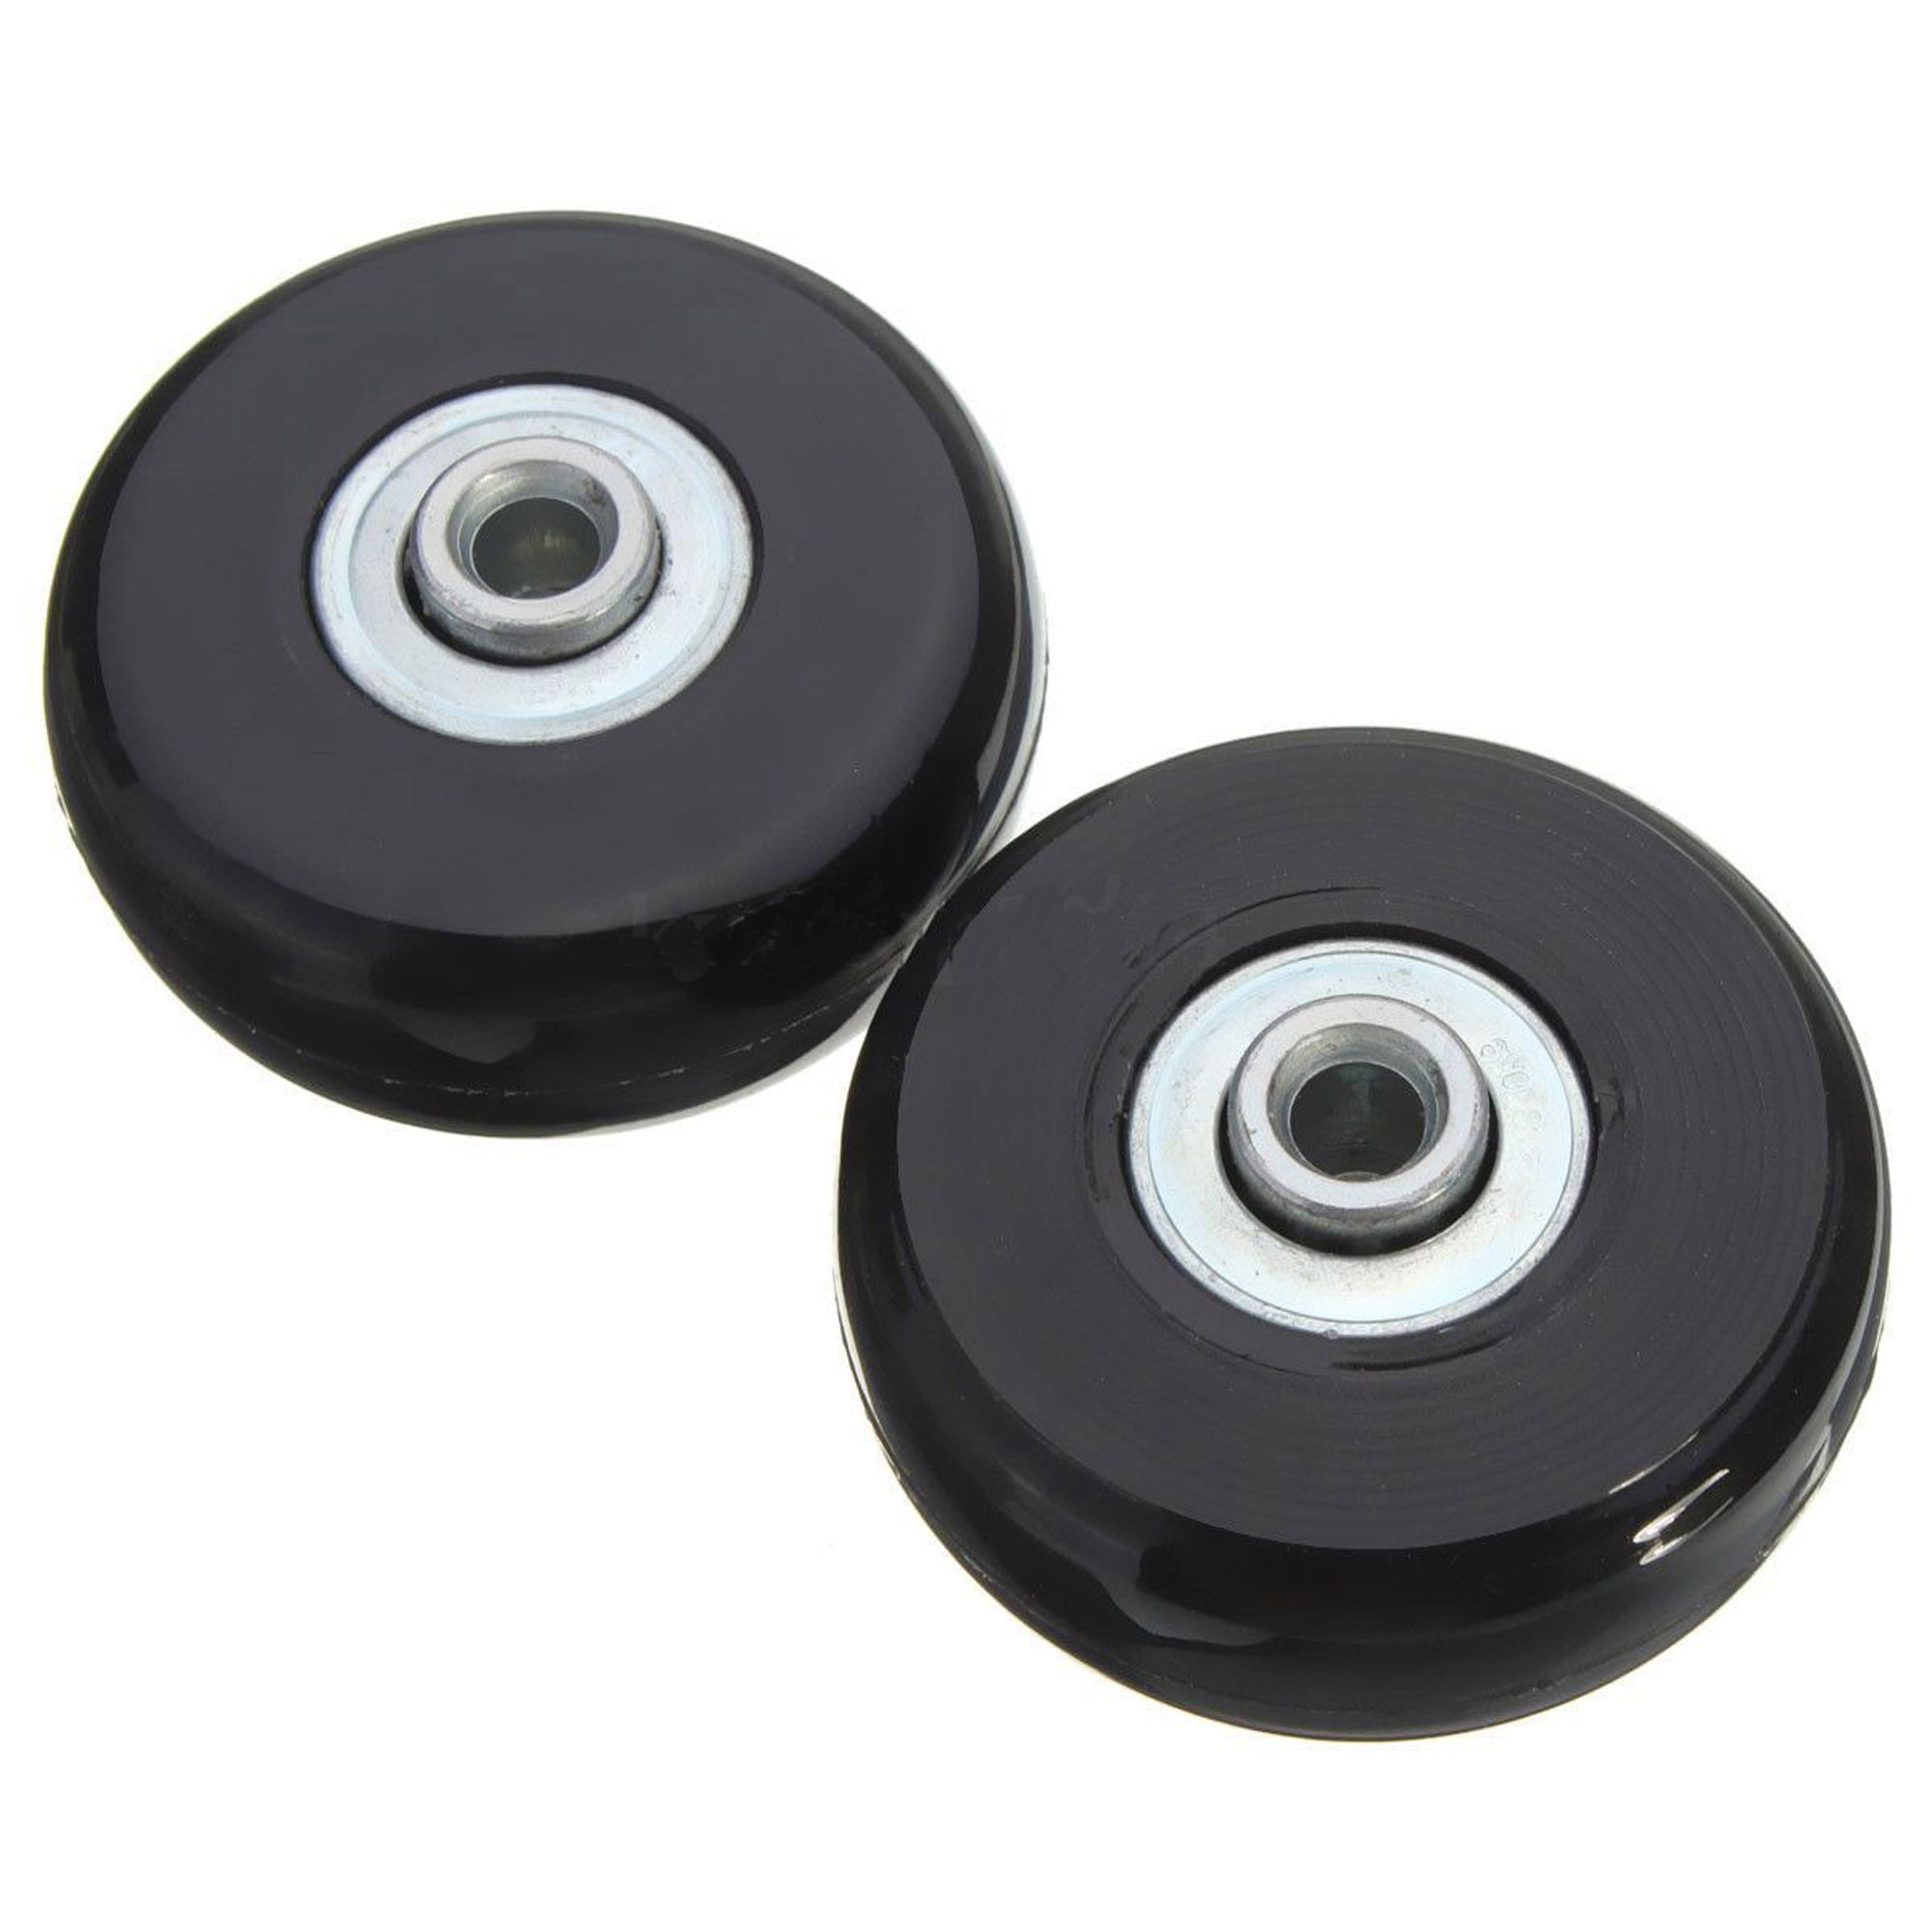 2 PCS Rubber Luggage Suitcase Wheels Roller Axles Repair Replacement OD 50mm